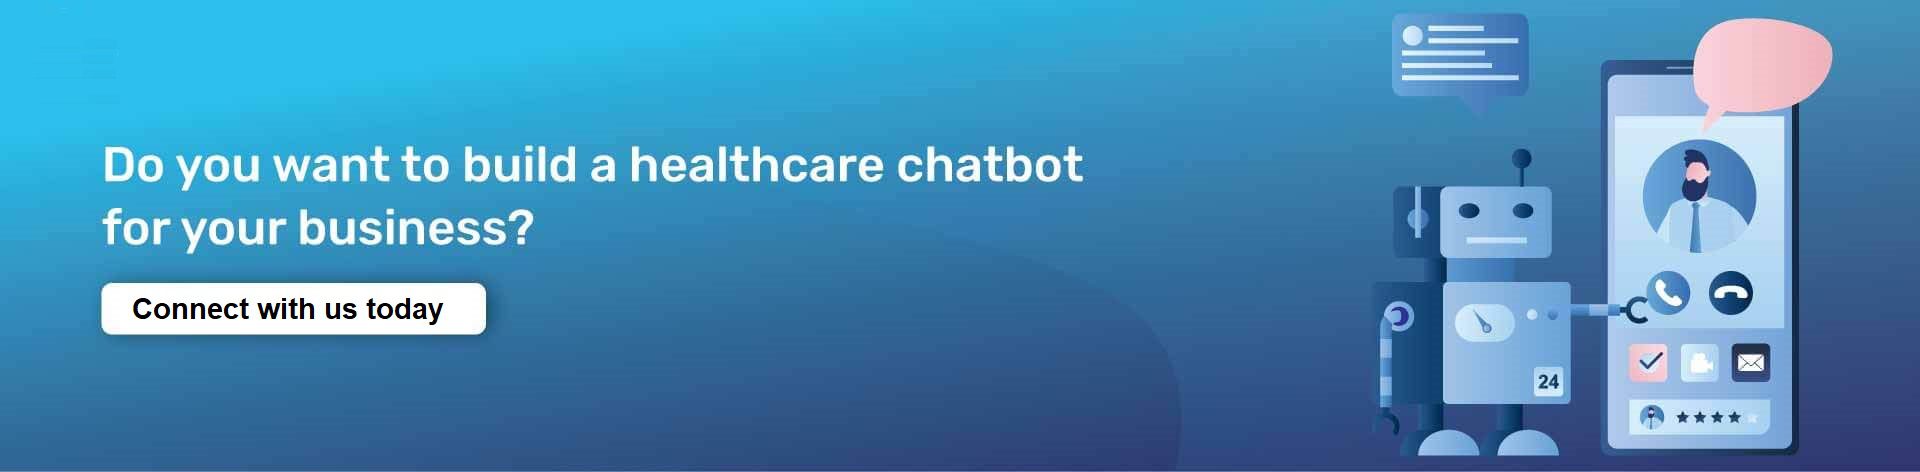 ai chatbot for healthcare